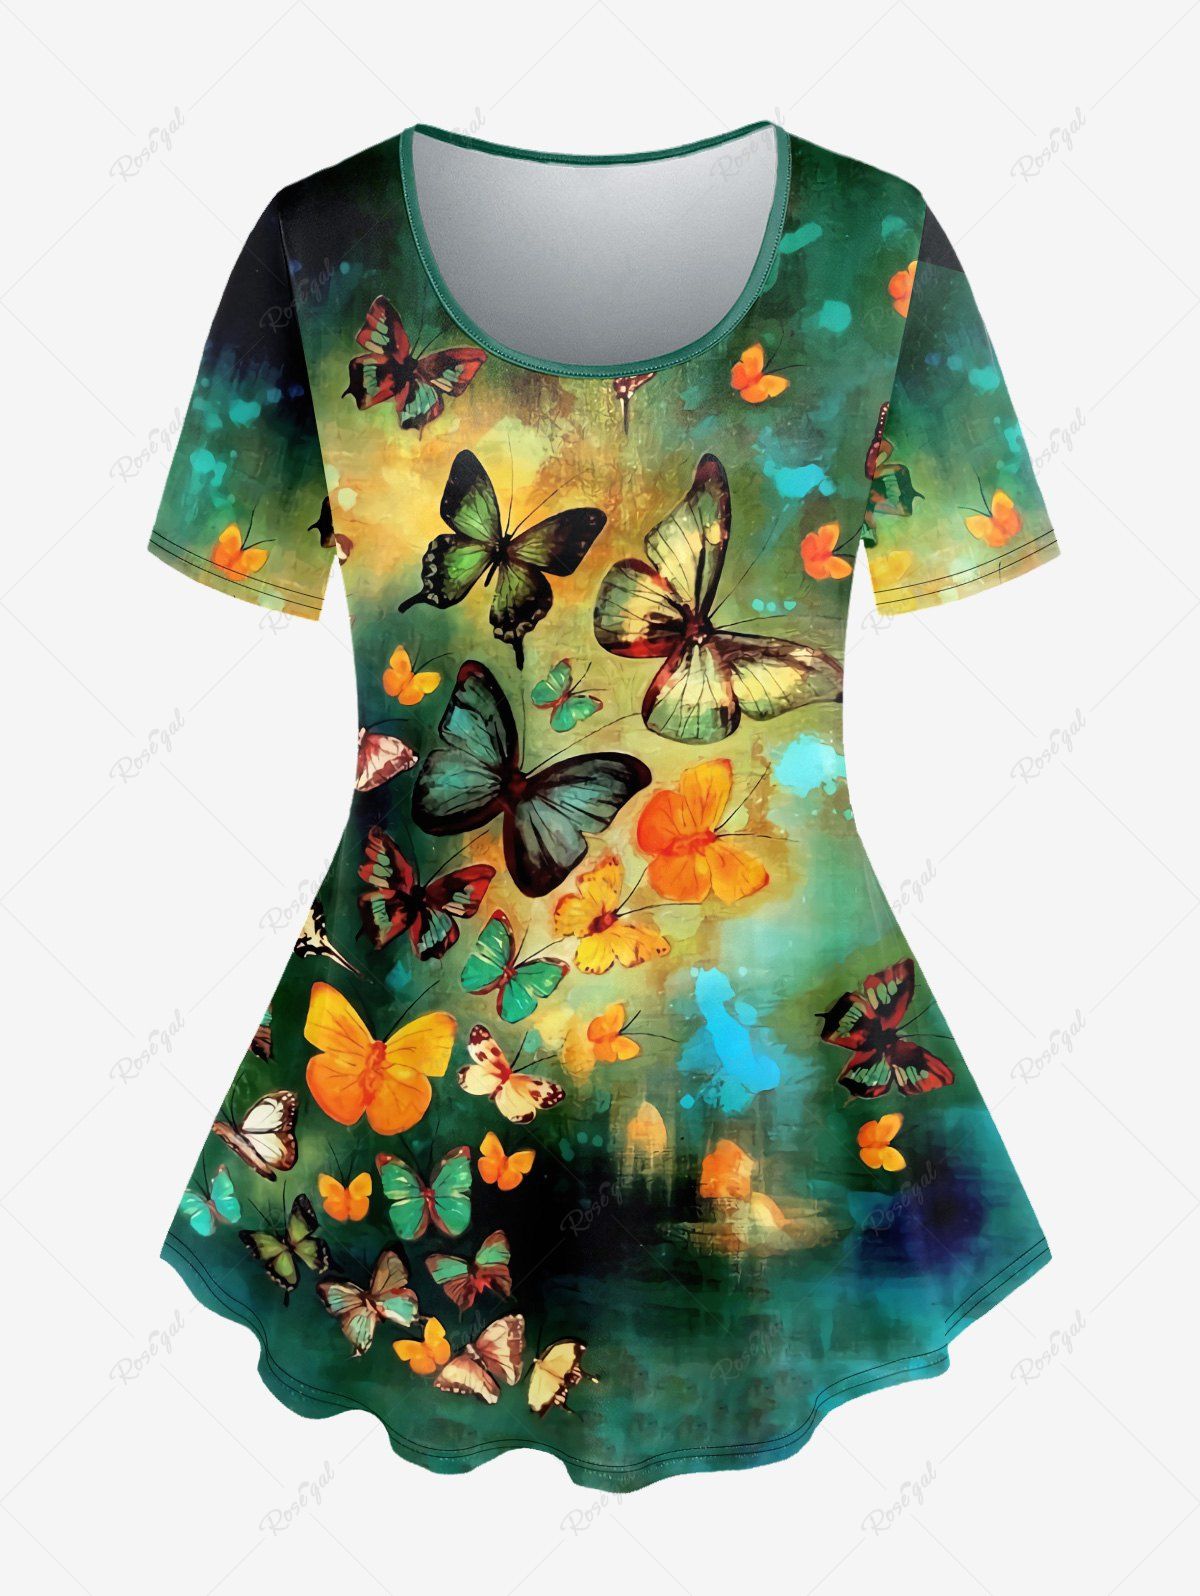 Chic Plus Size Vintage Butterfly Print T-shirt  